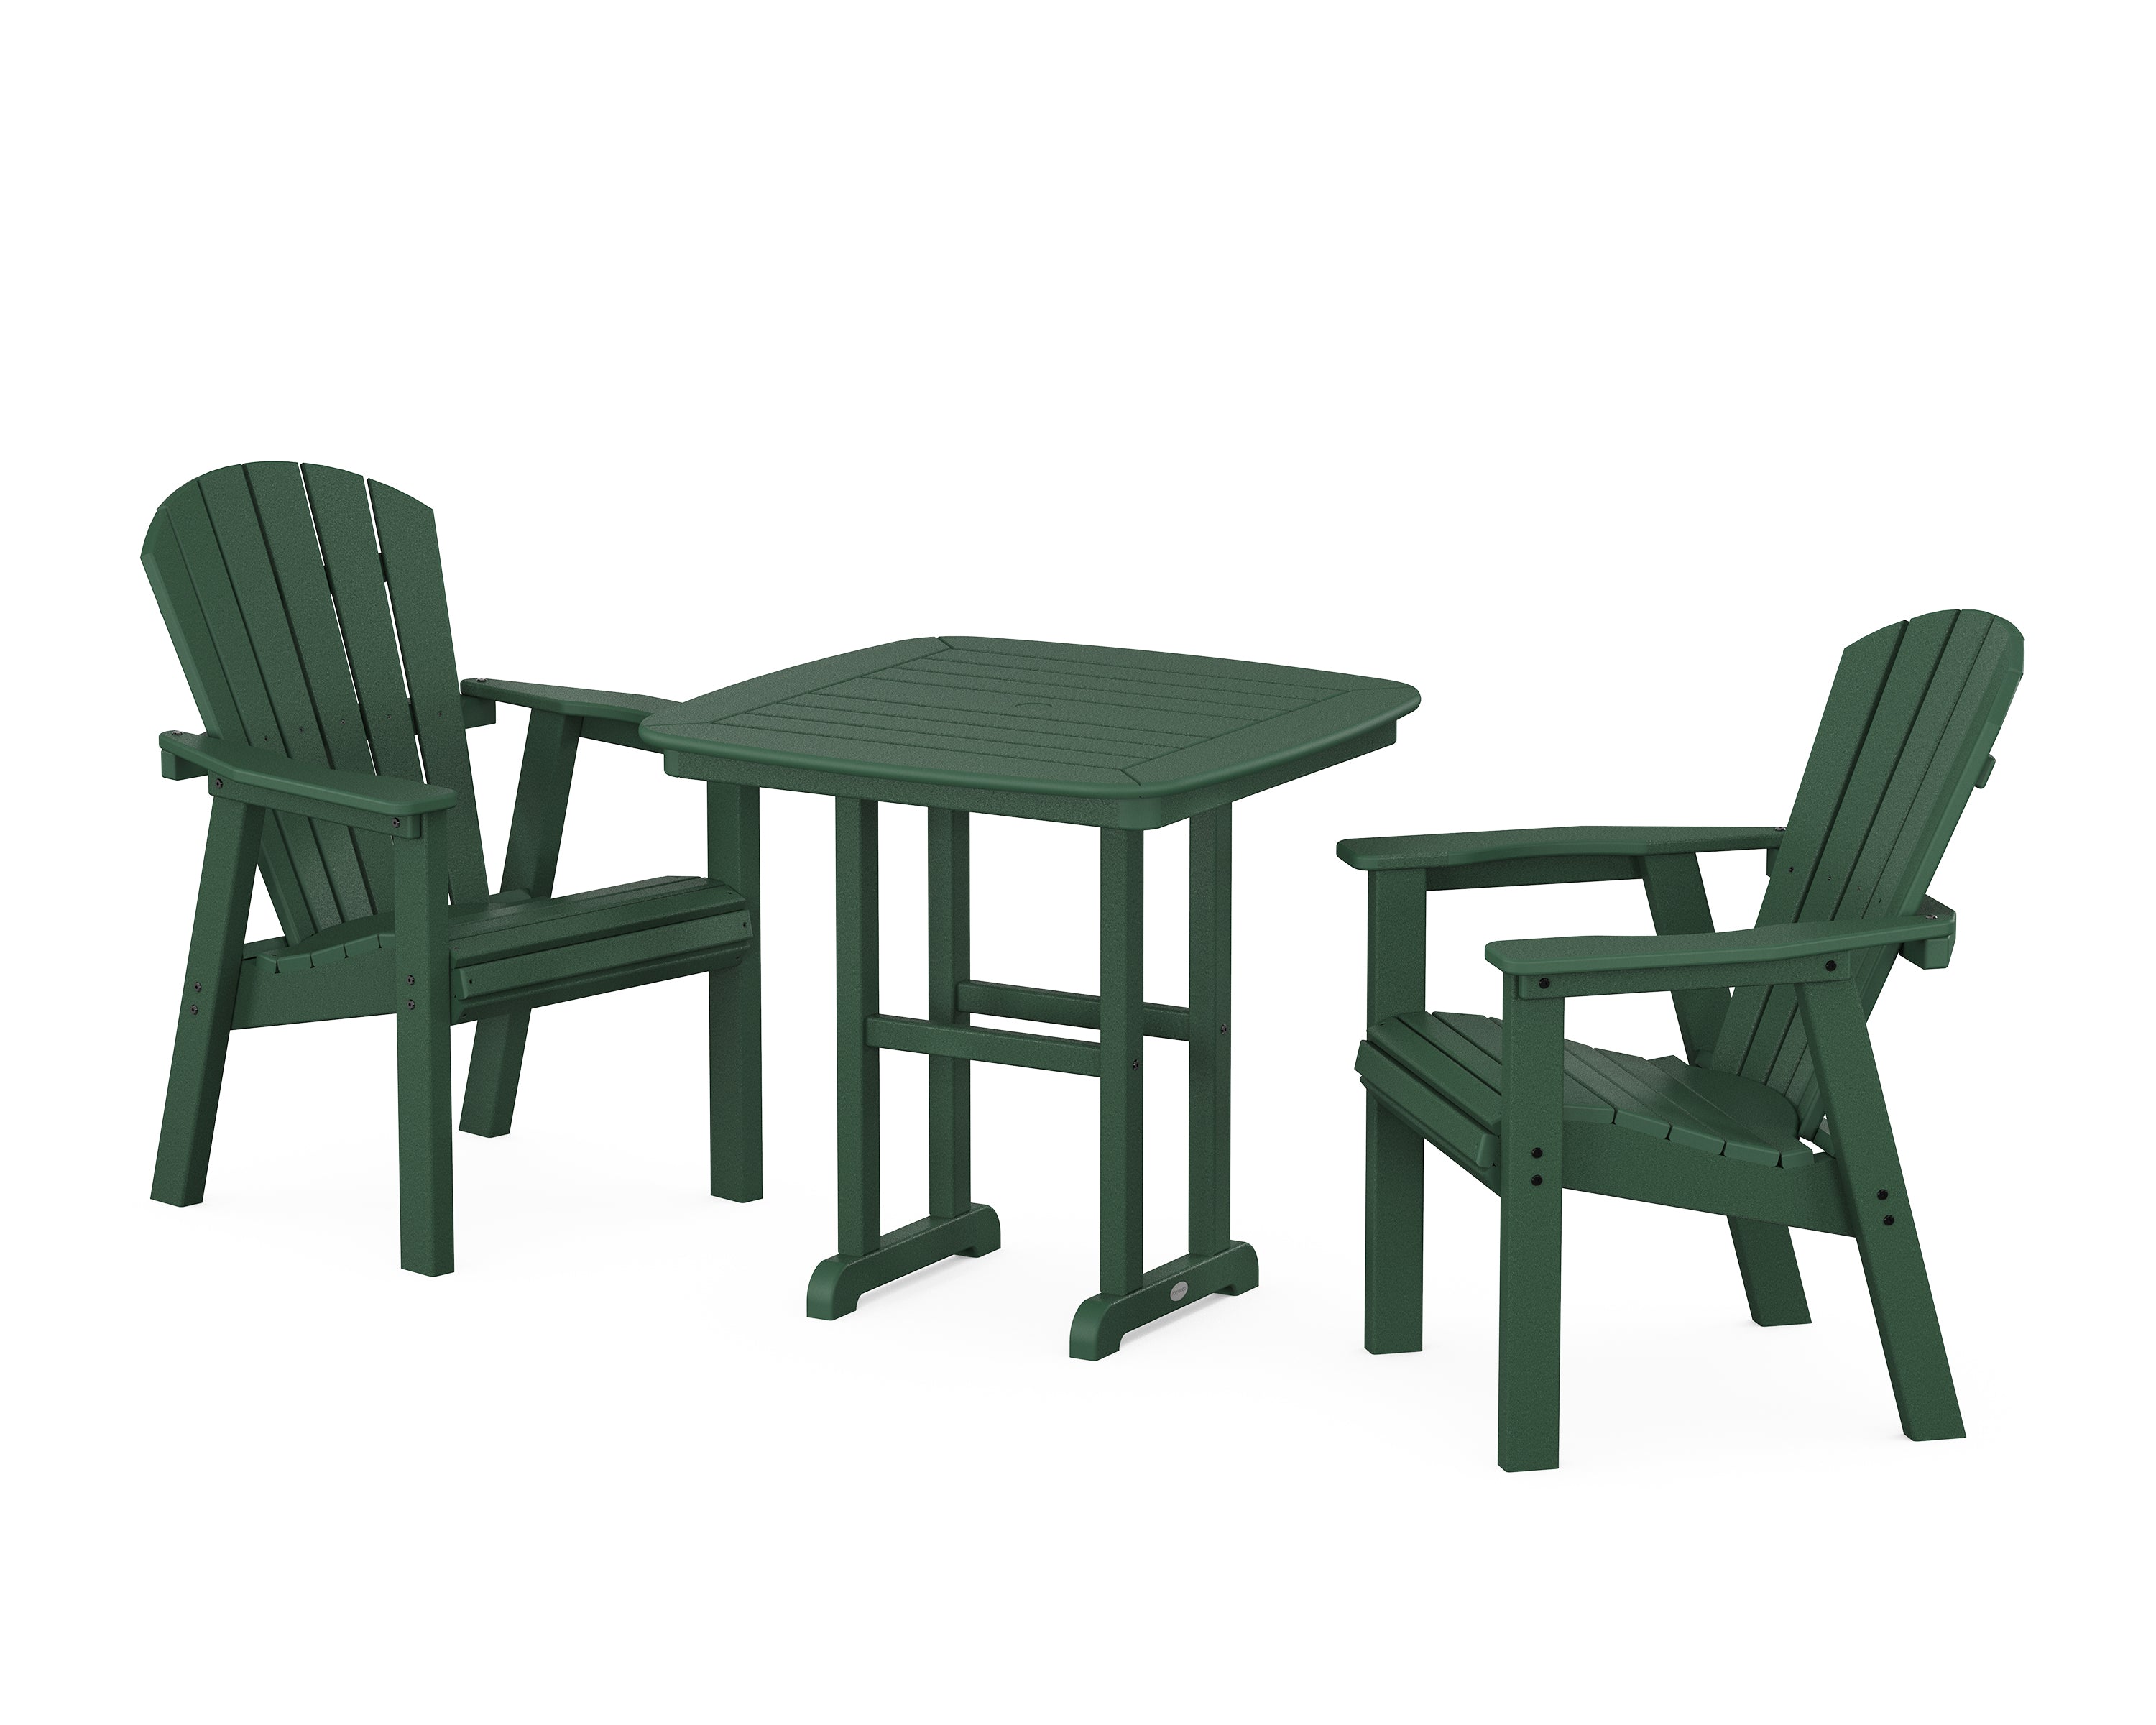 POLYWOOD® Seashell 3-Piece Dining Set in Green